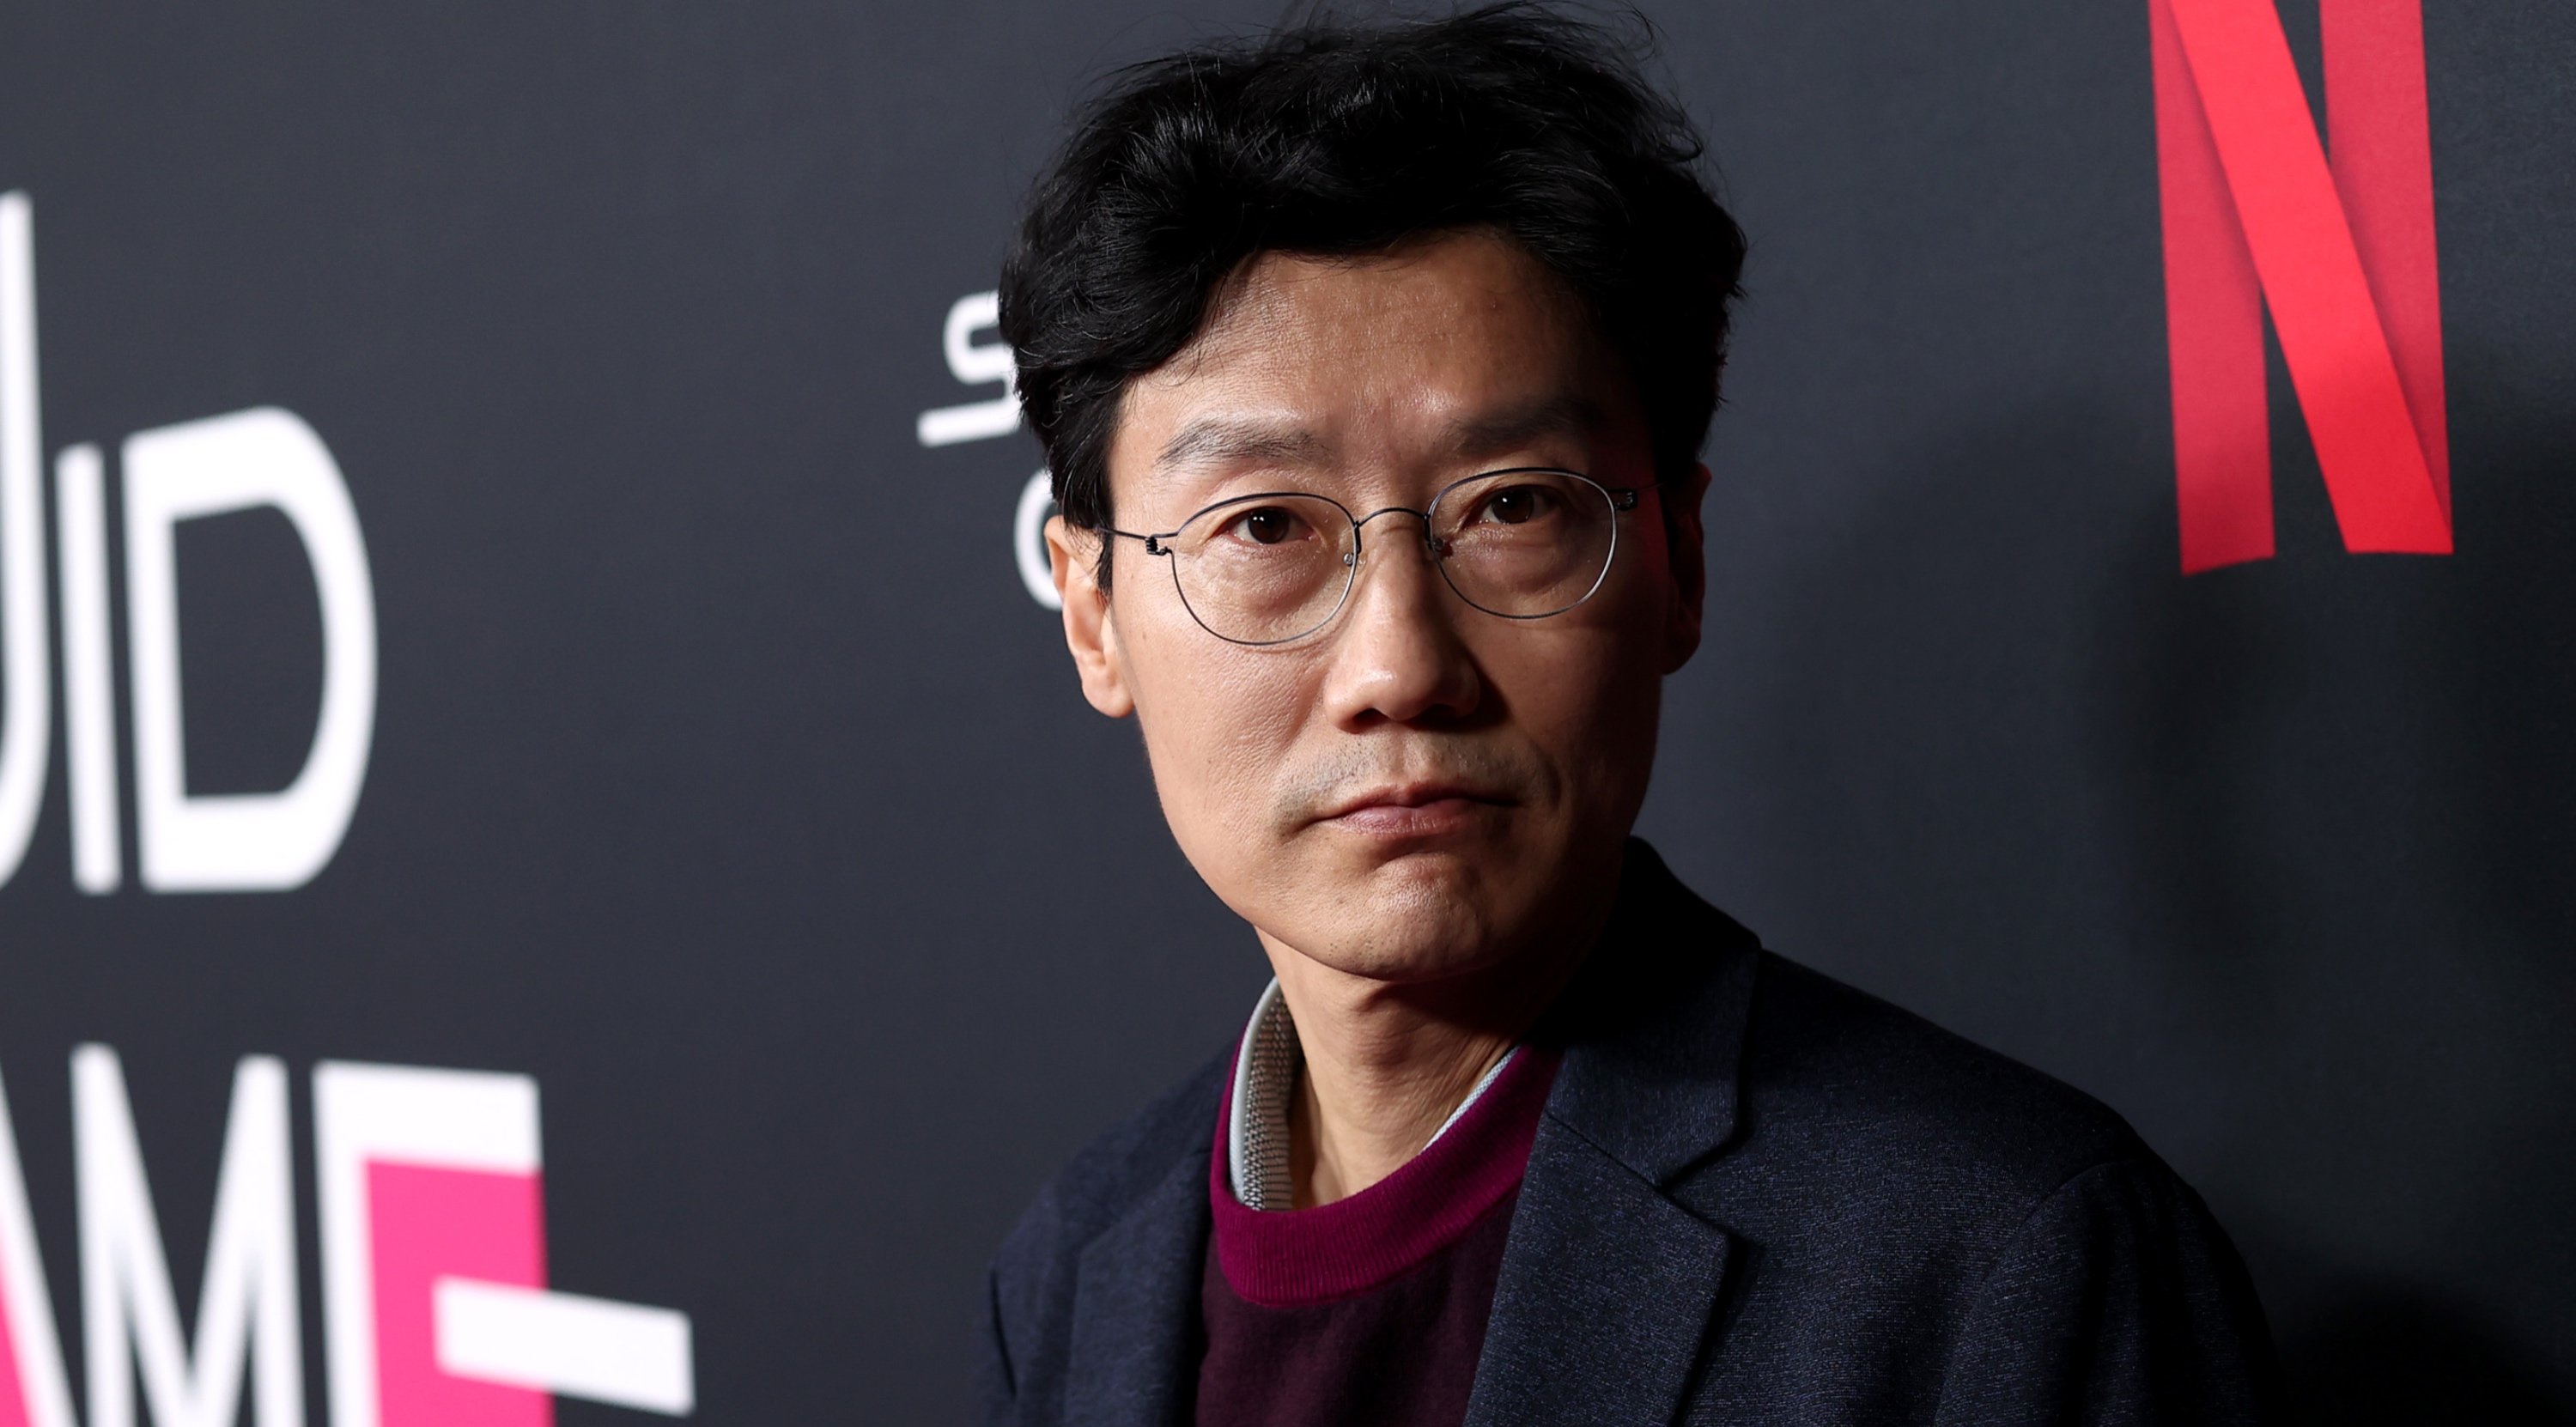 'Squid Game' director Hwang Dong-hyuk in front on red carpet photo op.